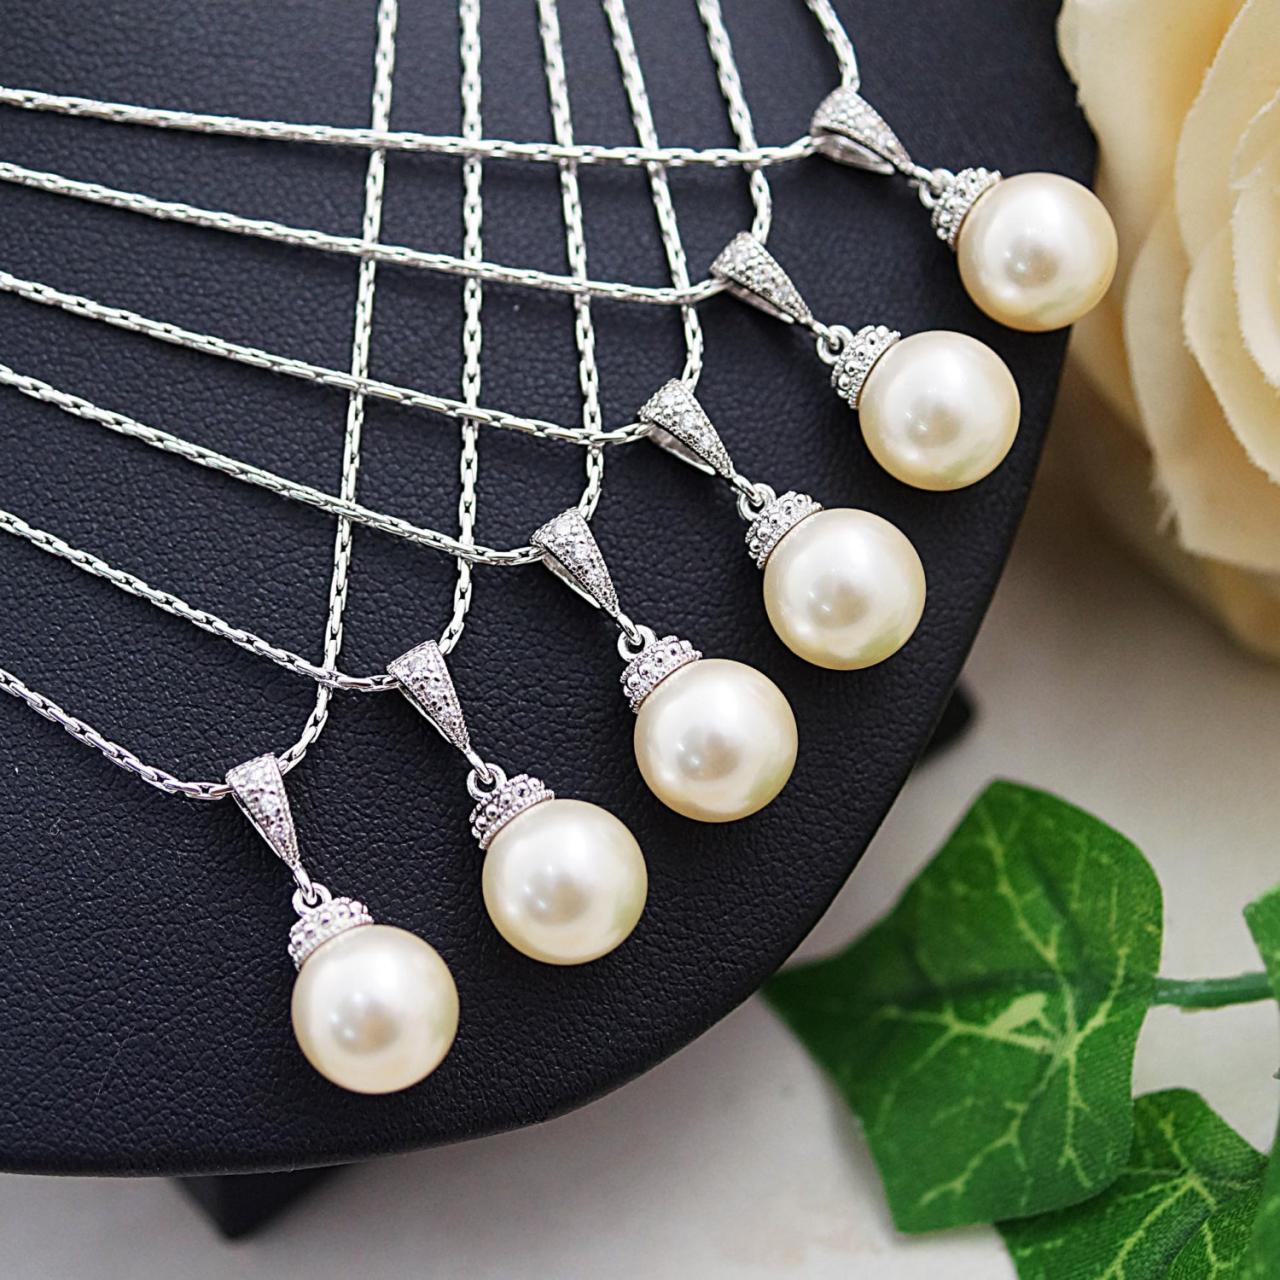 Wedding Jewelry Bridesmaid Gift Bridal Jewelry Bridal Necklace Bridesmaid Necklace Swarovski Pearl Drops Necklace Pearl Jewelry